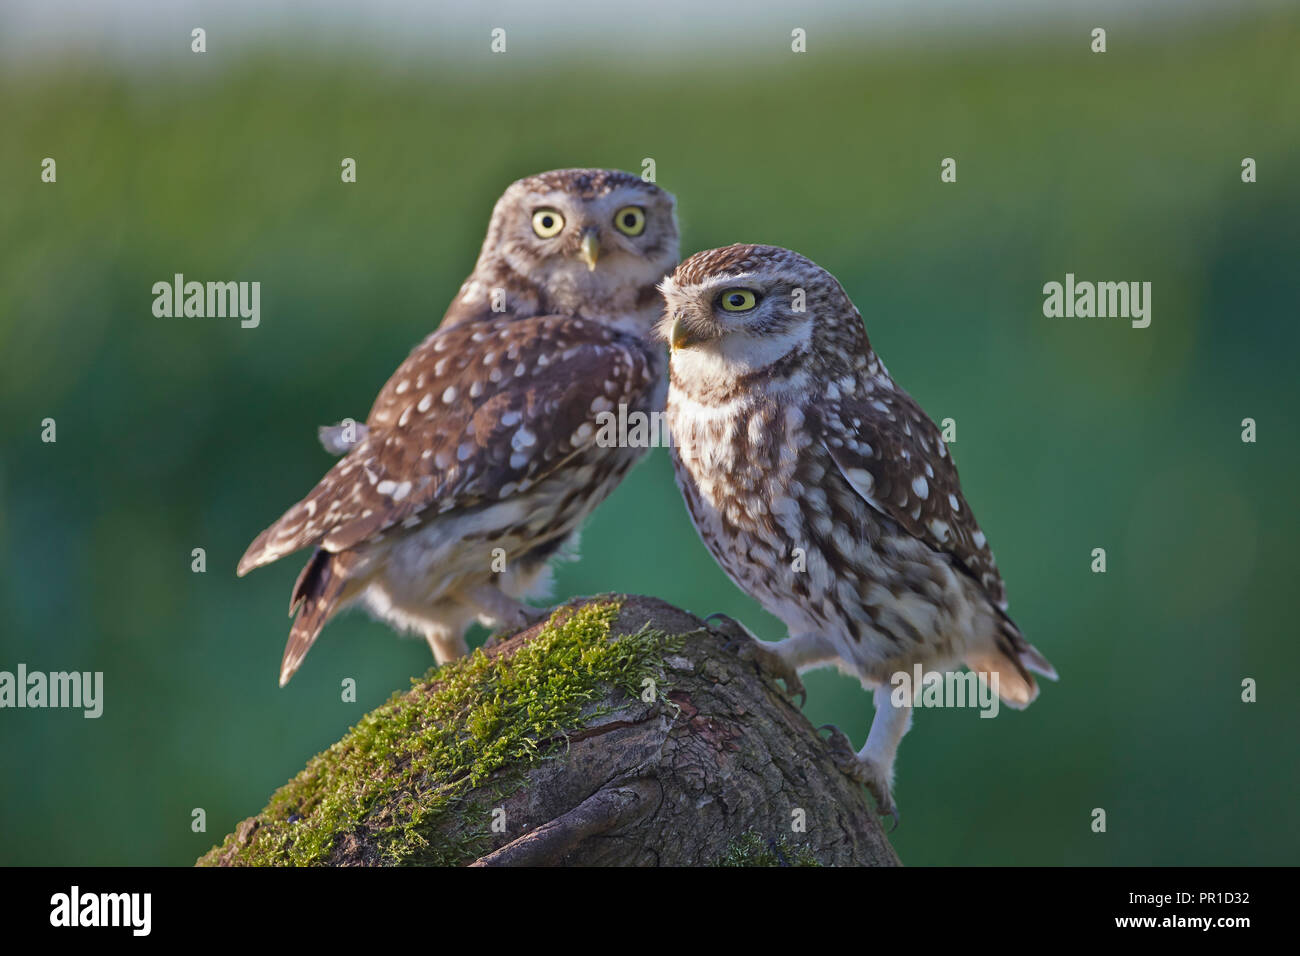 Two a pair of Little Owls, Athene noctua photographed at the Les Gibbon Little Owl photography hide, East Yorkshire. Stock Photo